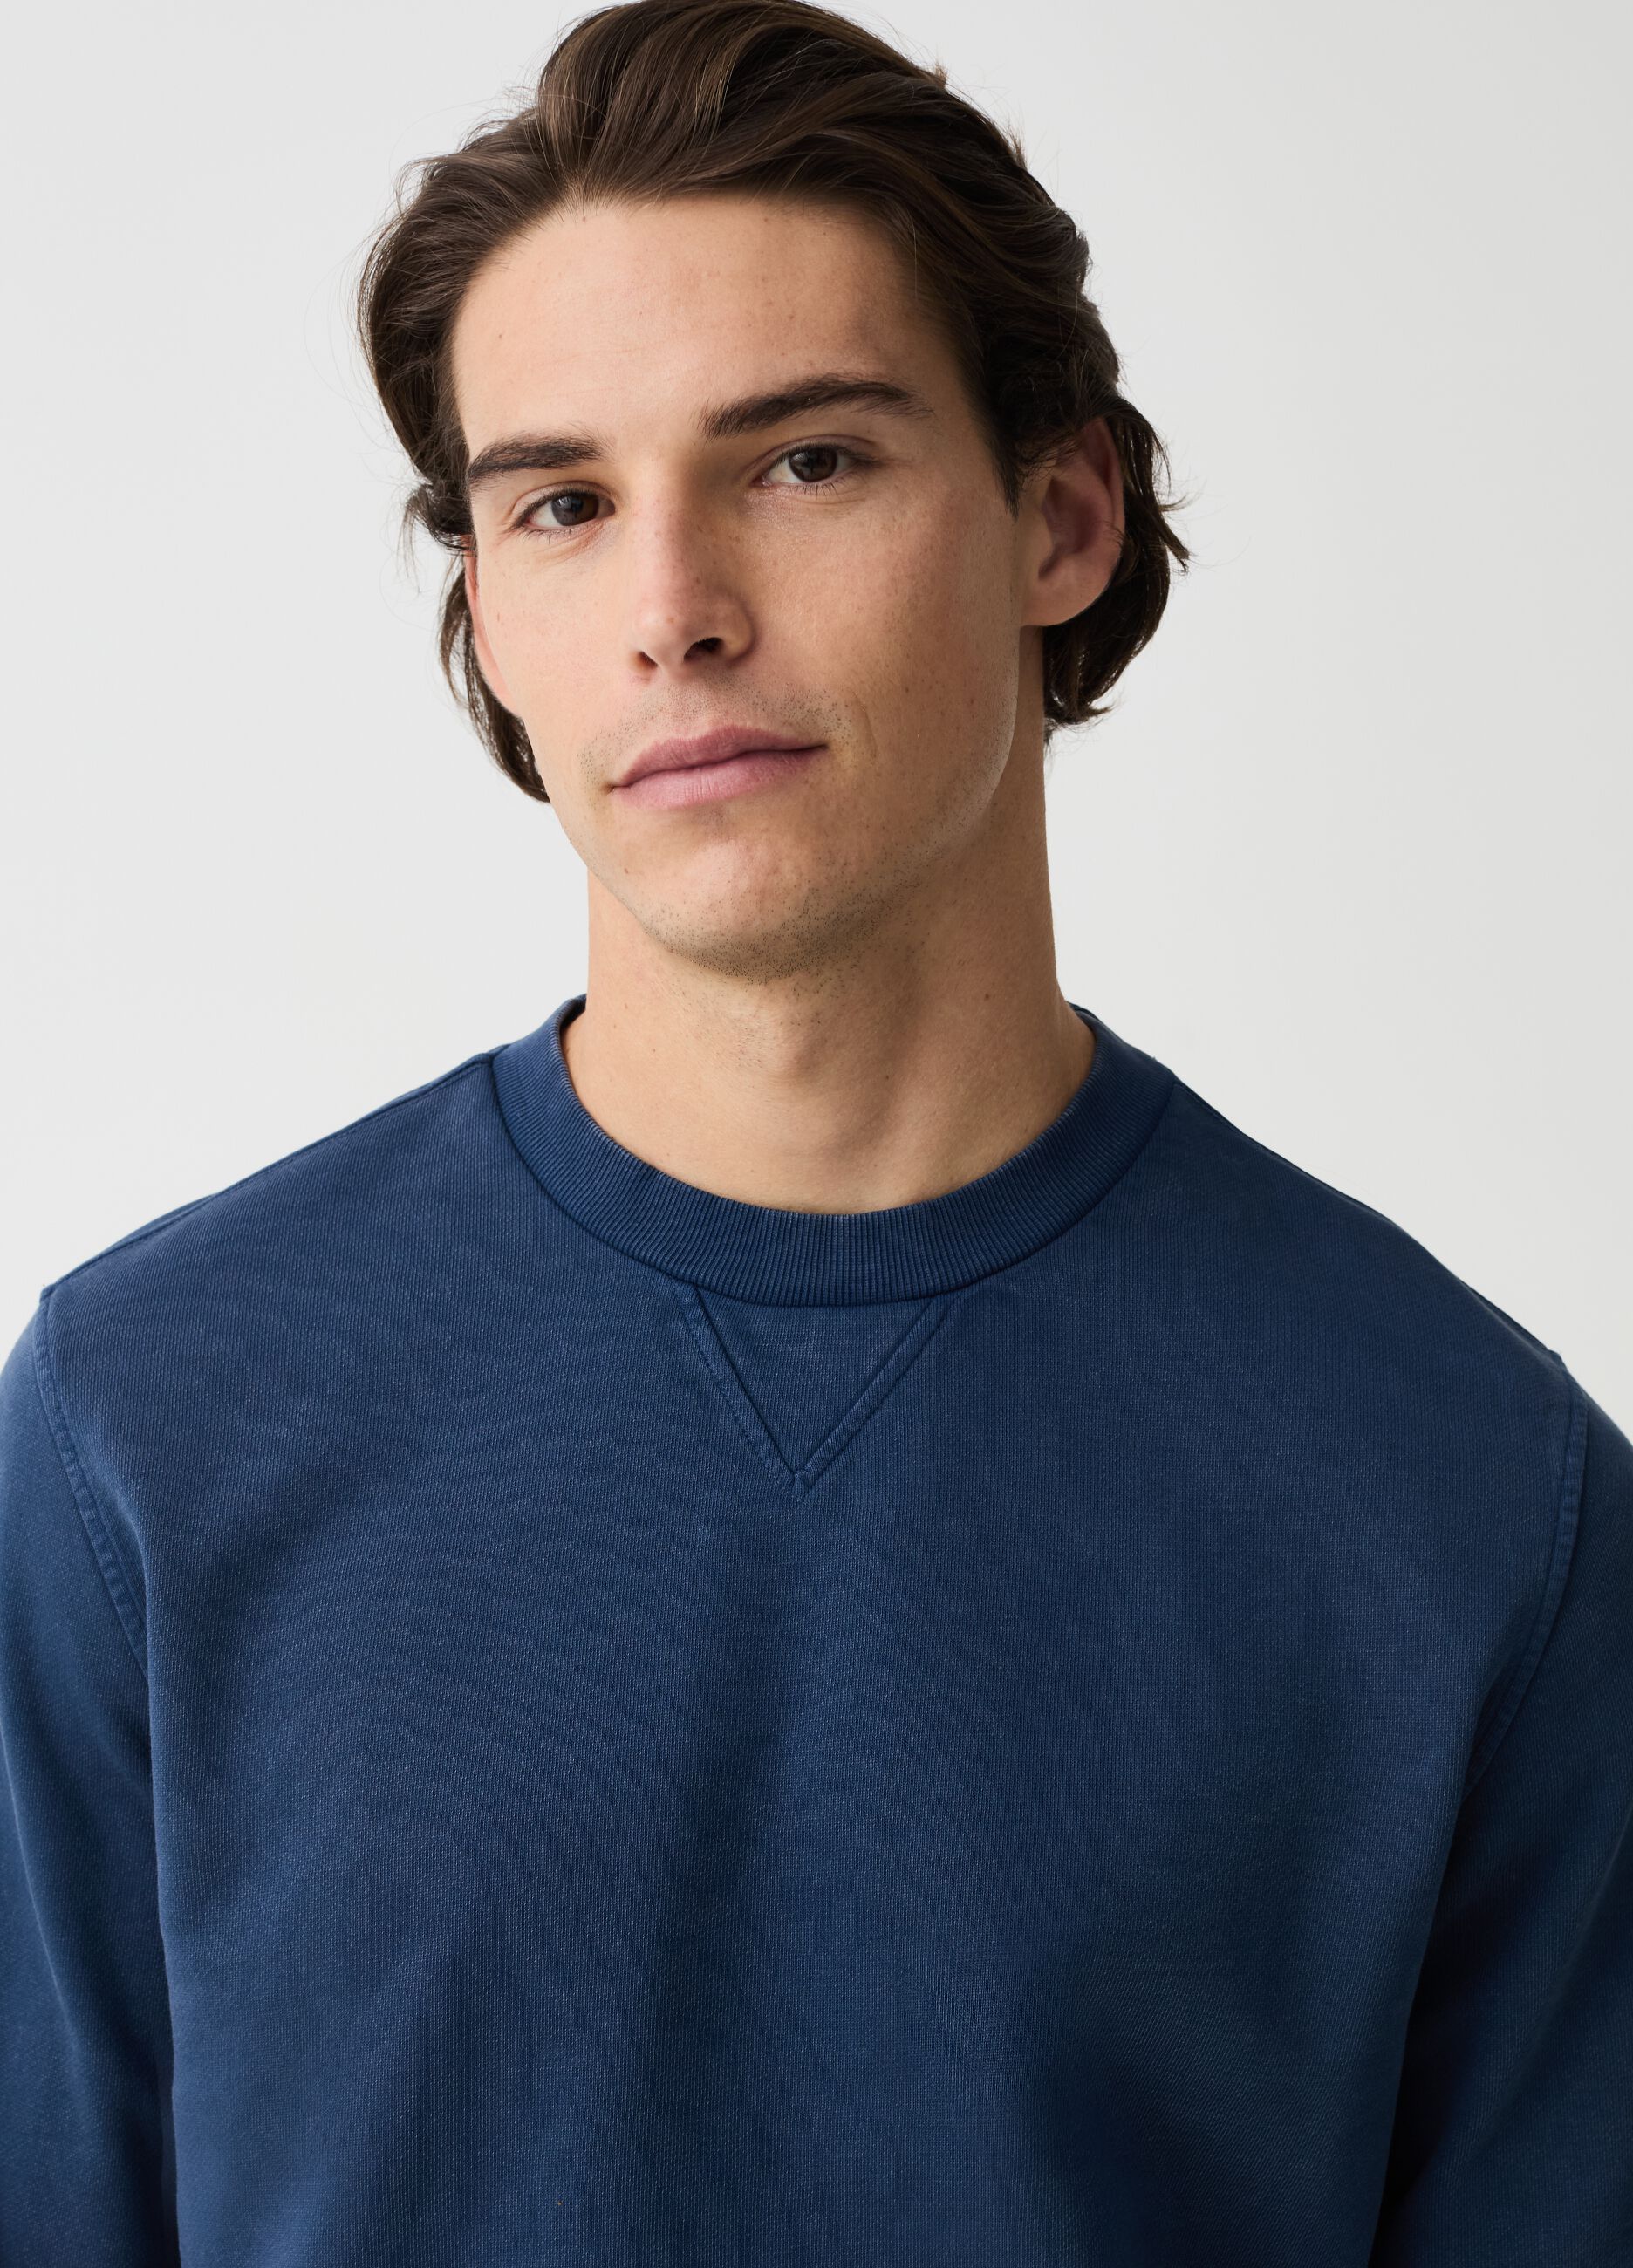 Sweatshirt with round neck and V detail